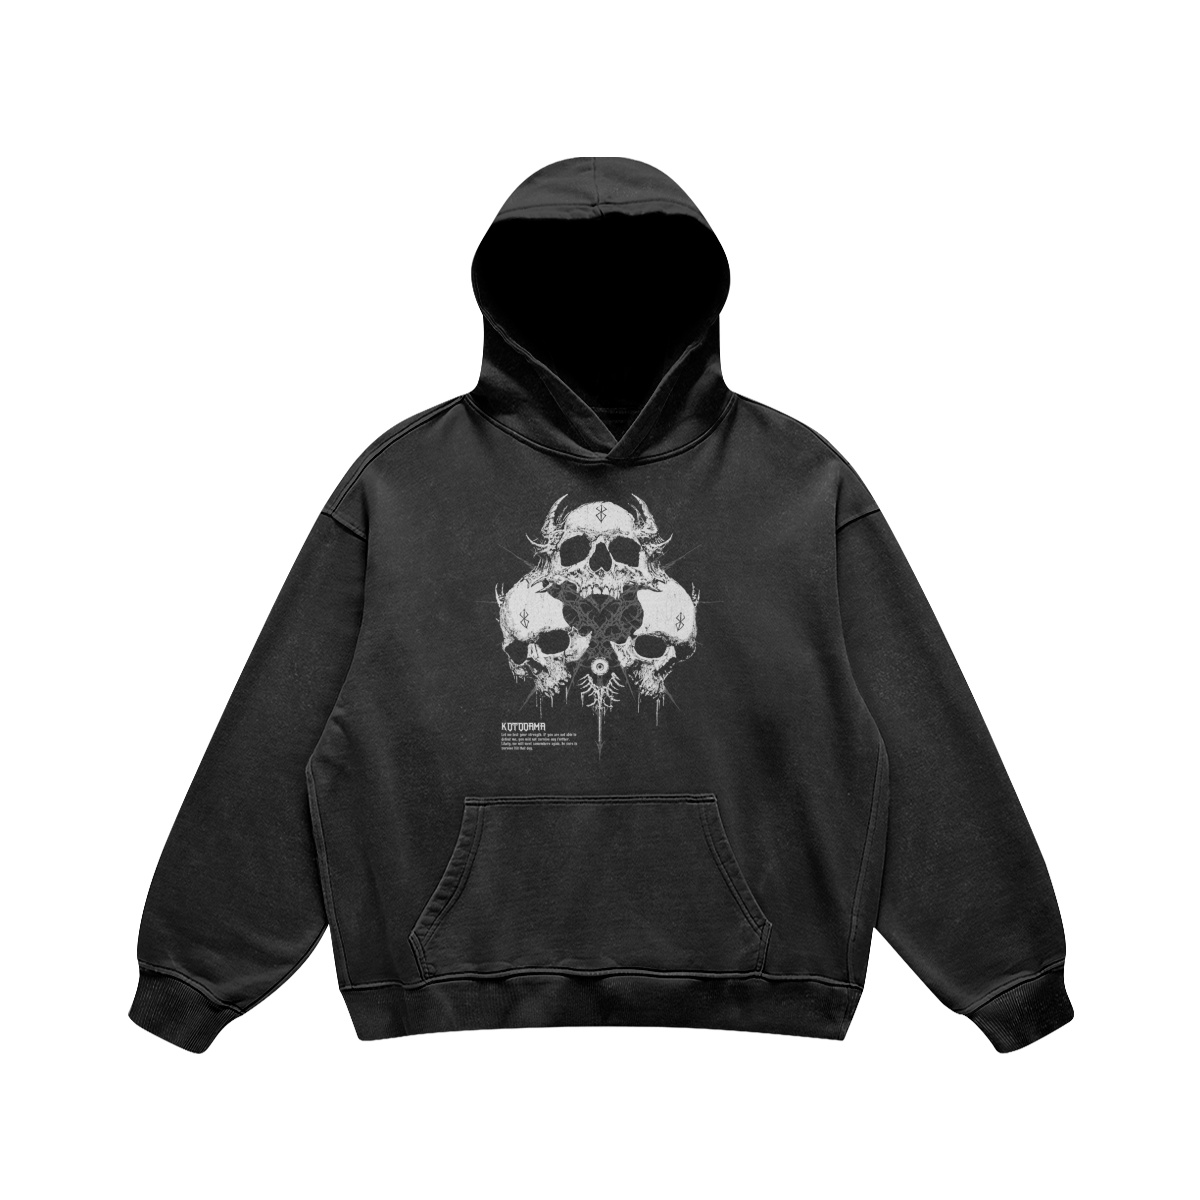 Berserk Hoodie | Limited Edition Anime Inspired Collection